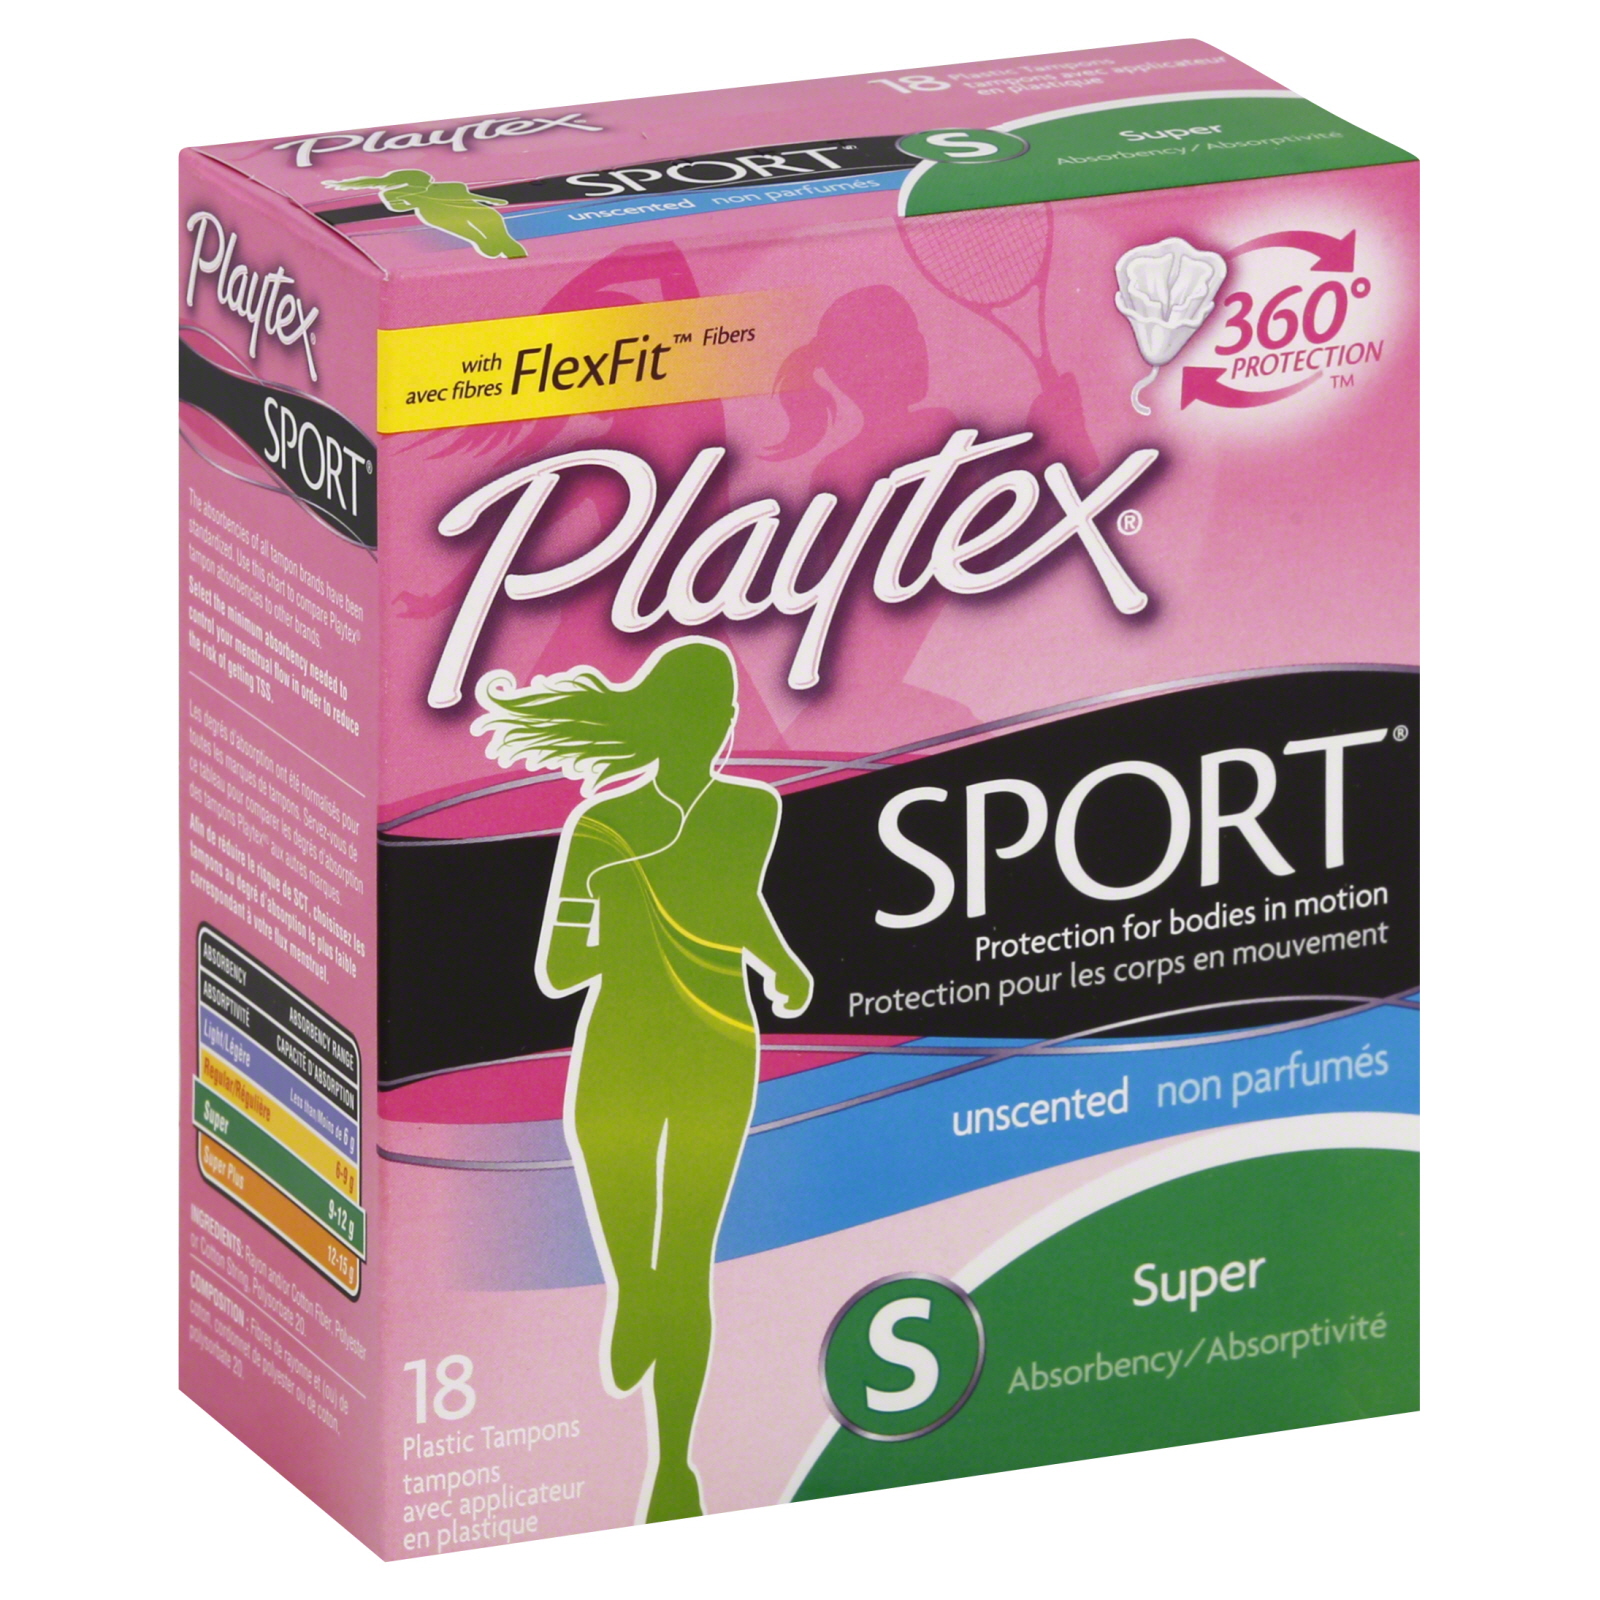 Playtex Sport Tampons, Plastic, Super Absorbency, Unscented, 18 tampons